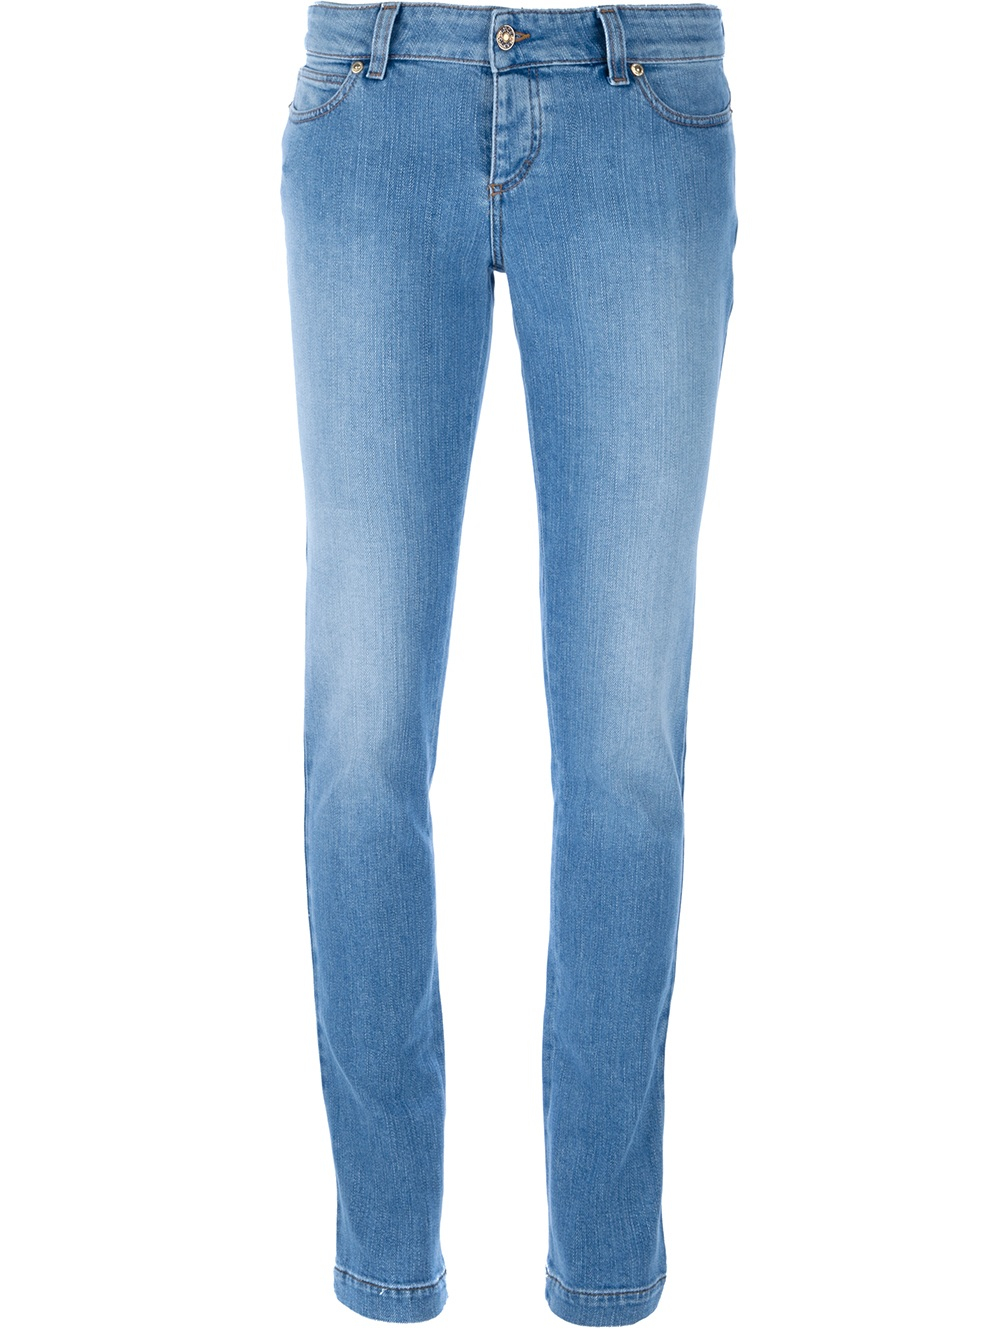 Gucci Floral Print Jeans in Blue - Lyst